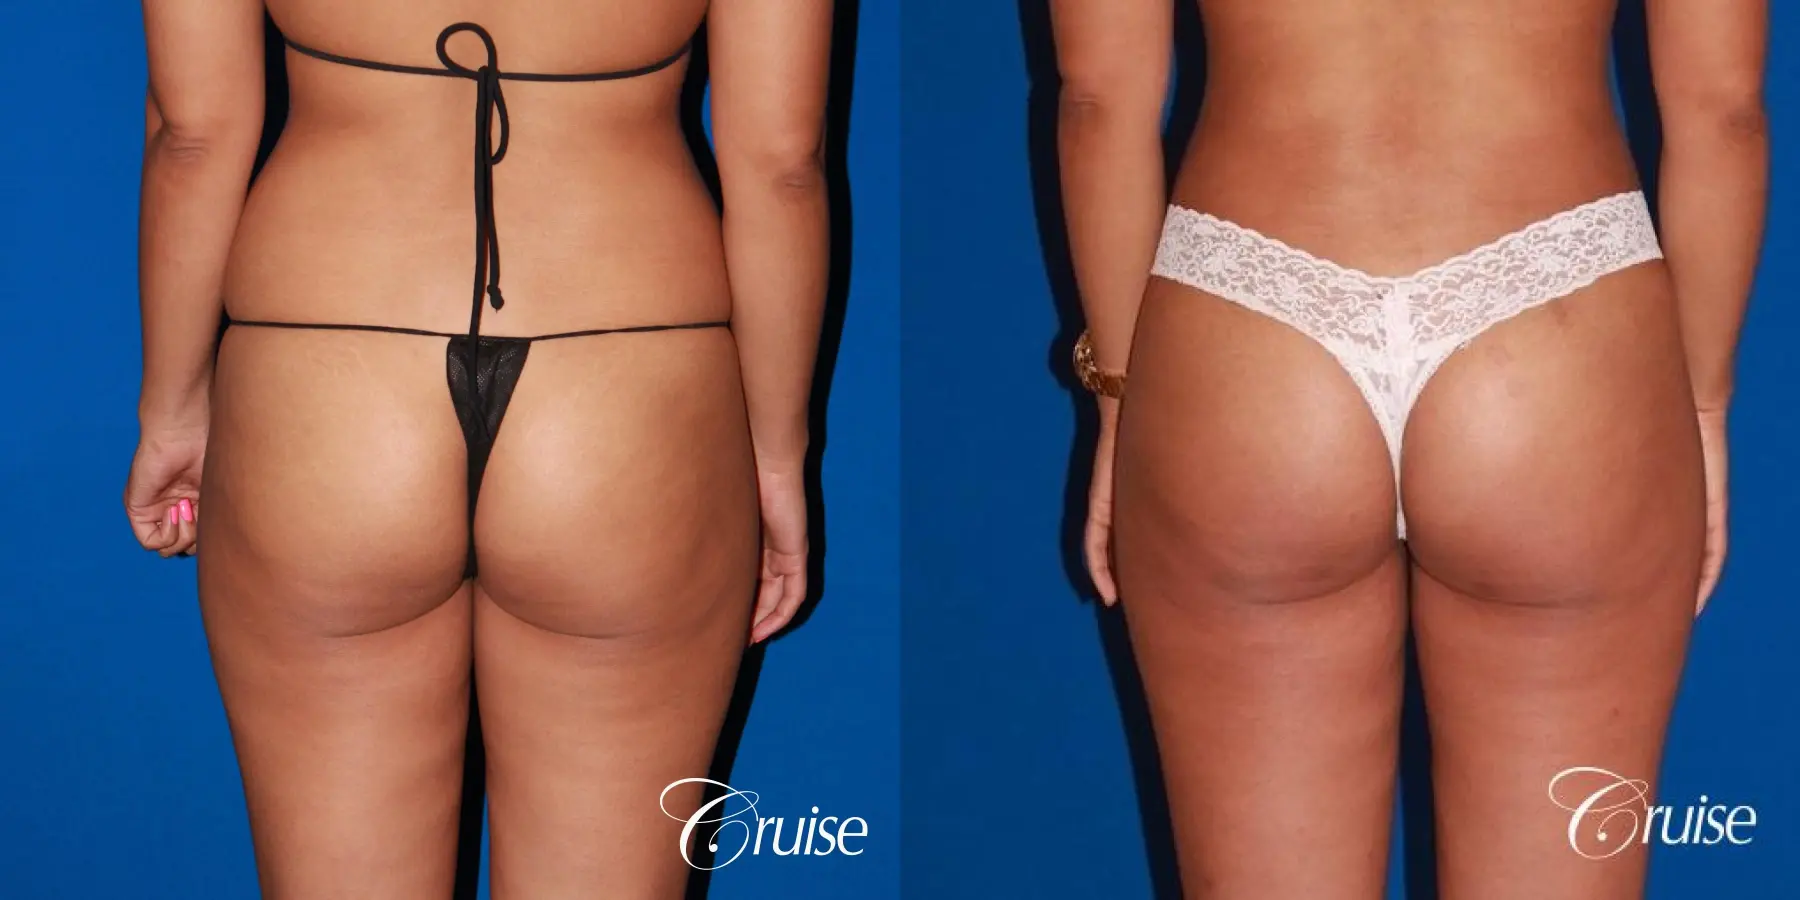 https://www.bragbook.gallery/assets/gallery/220/liposuction-before-and-after-J46p1Y5McBie_highres.webp